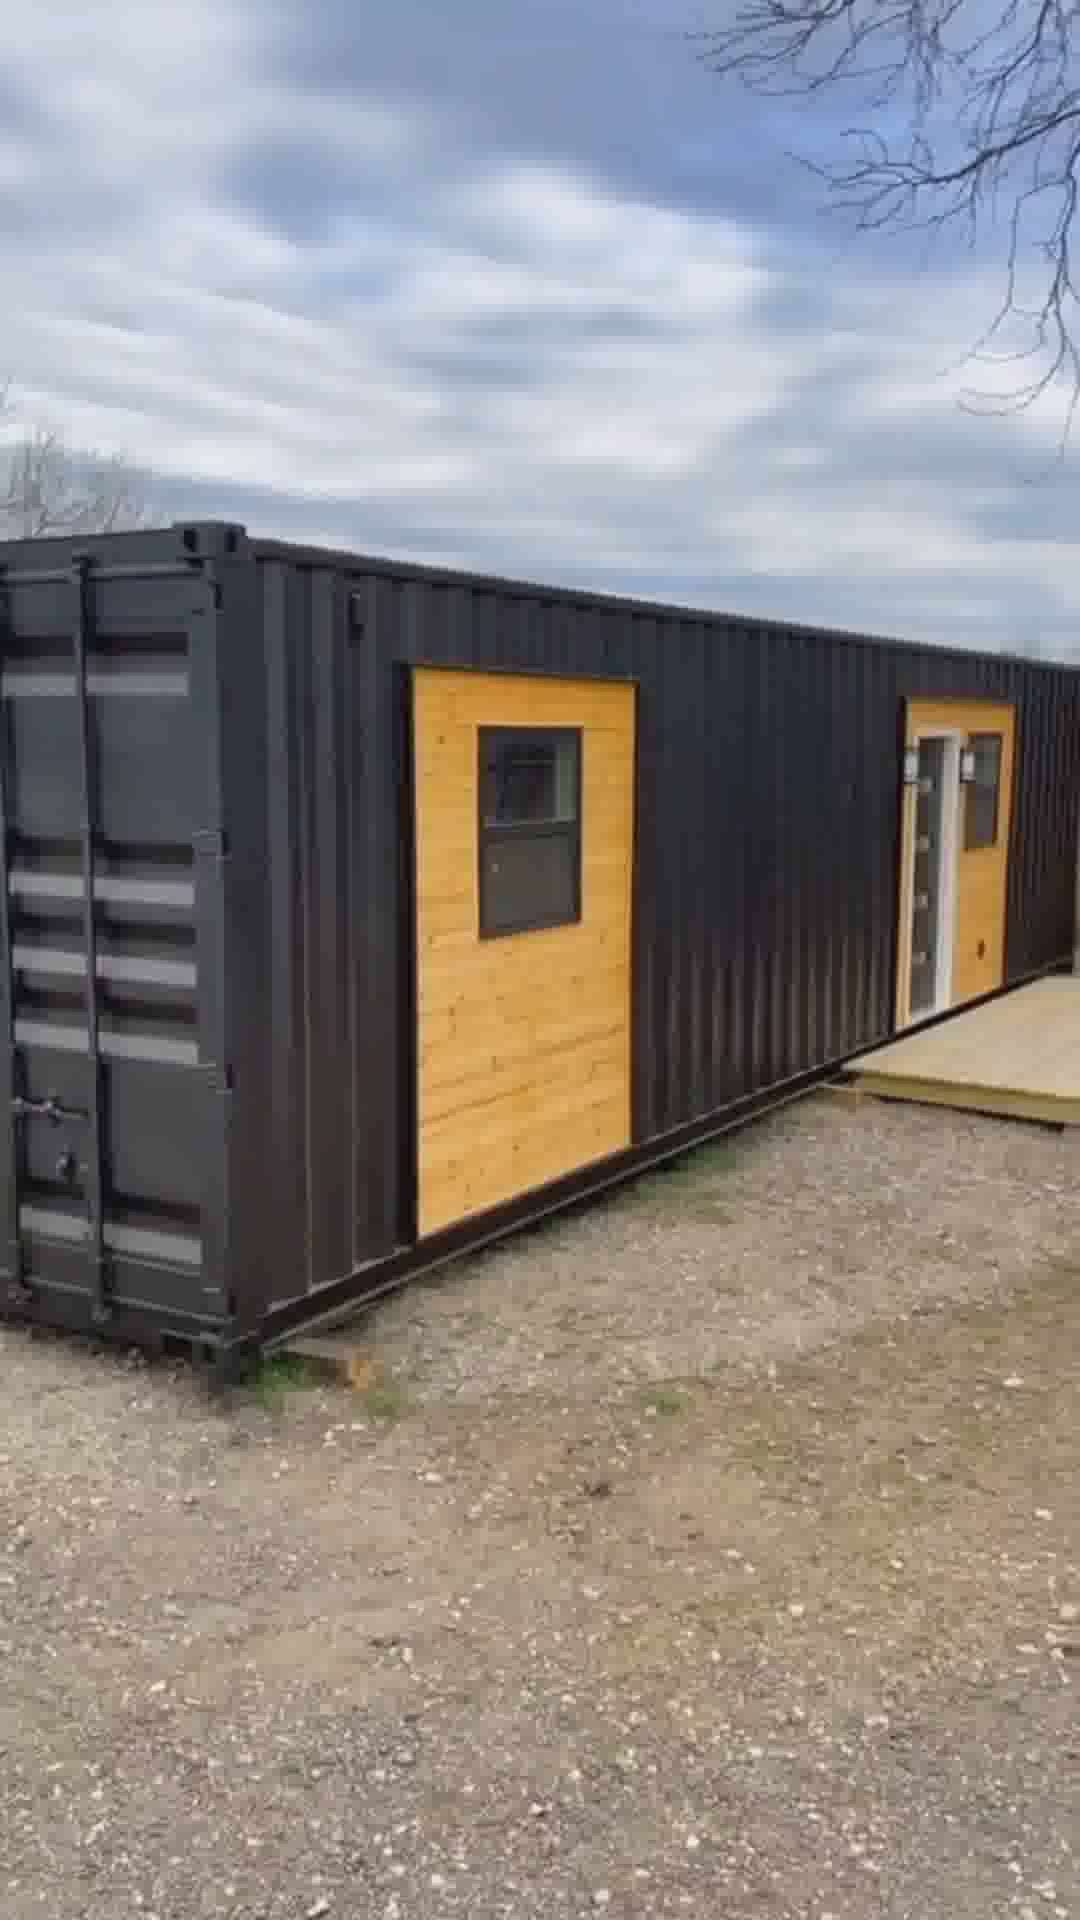 Container House India are expert builders of shipping container homes, offices, cafés, cabins and more. Reach out to us at 9864645923.
___________________
#containerhome #containerhouse #containercafe #container #Contractor #buid #new_home #newwork